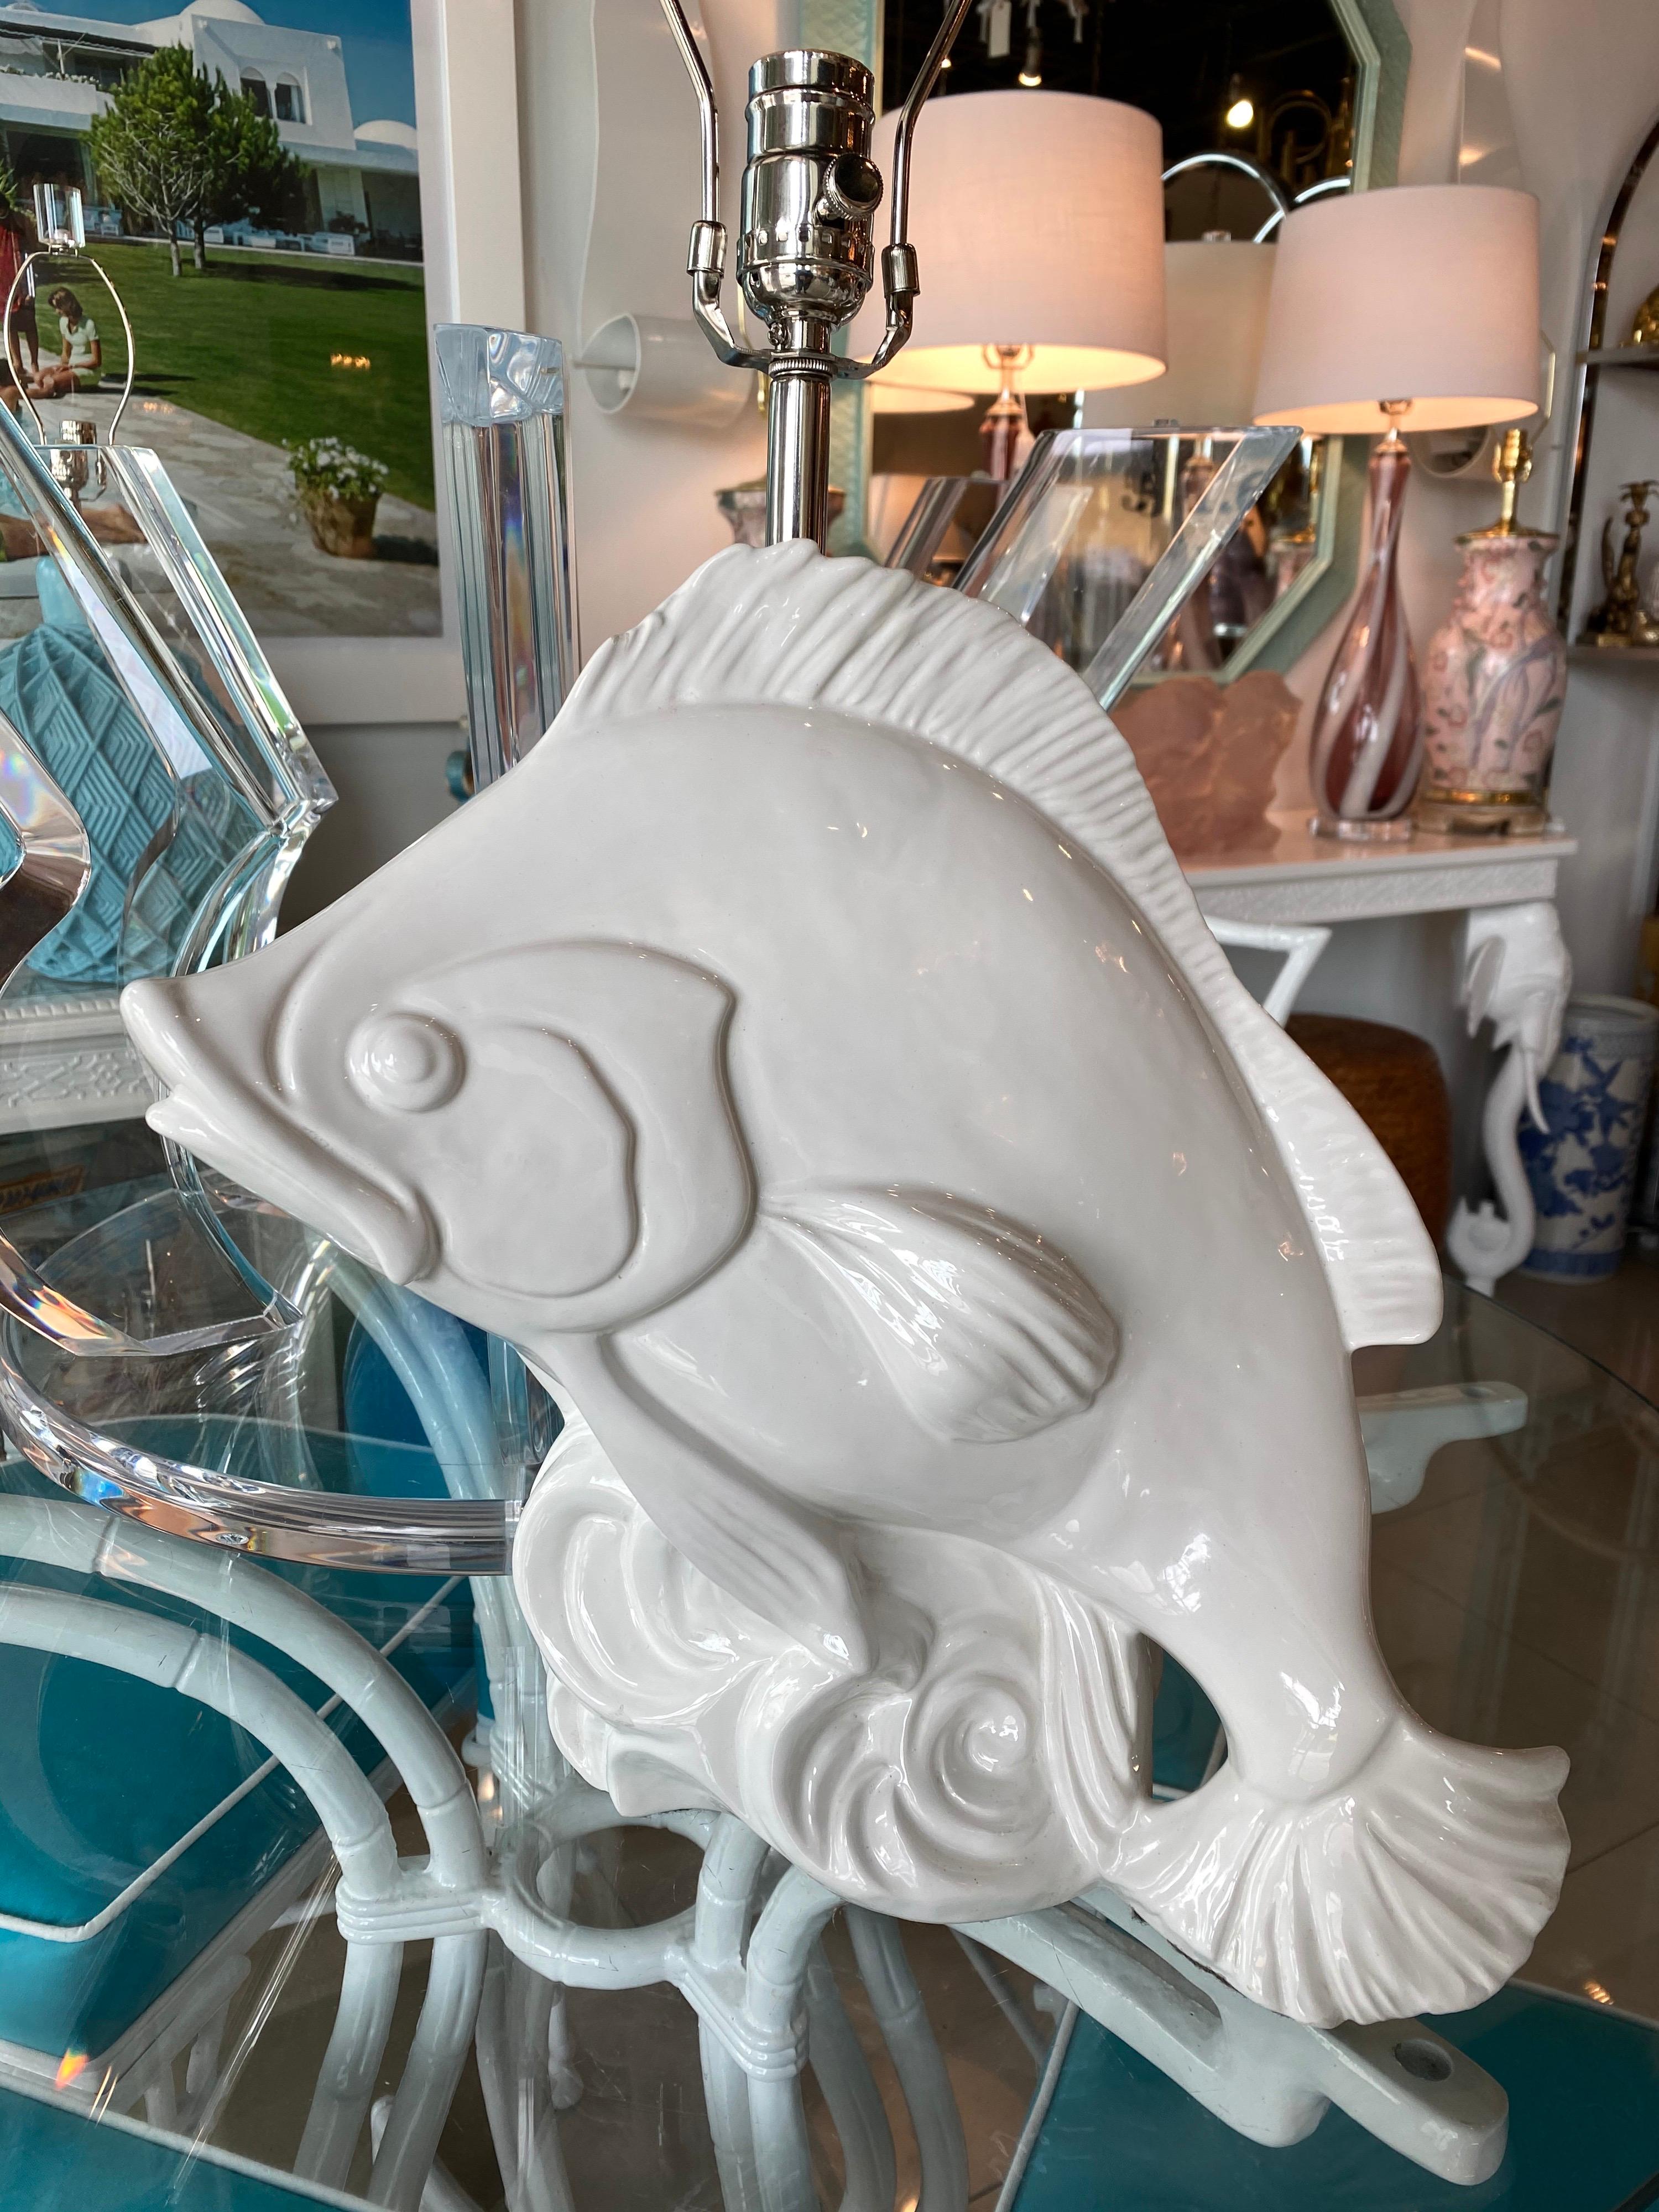 Lovely vintage white ceramic tropical fish table lamp. Newly wired with all new chrome 3 way sockets and hardware. Marked Made in Italy on lamp. Measures 18.5 H to socket top, 24.75 H to top of final.